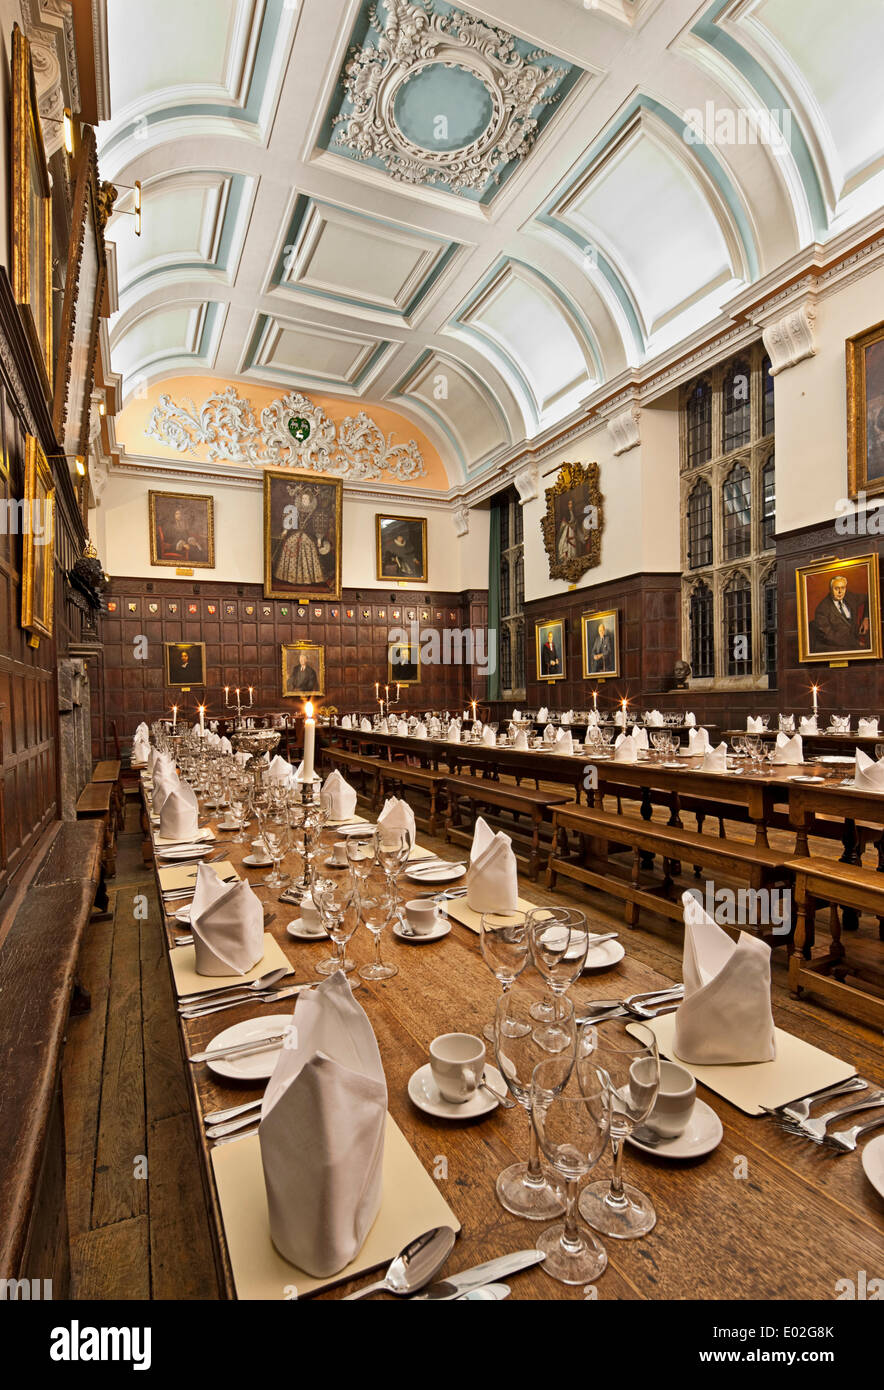 Jesus College Oxford, Oxford, United Kingdom. Architect: N/A, 1571. Dining  Hall laid out for banquet with candle light Stock Photo - Alamy